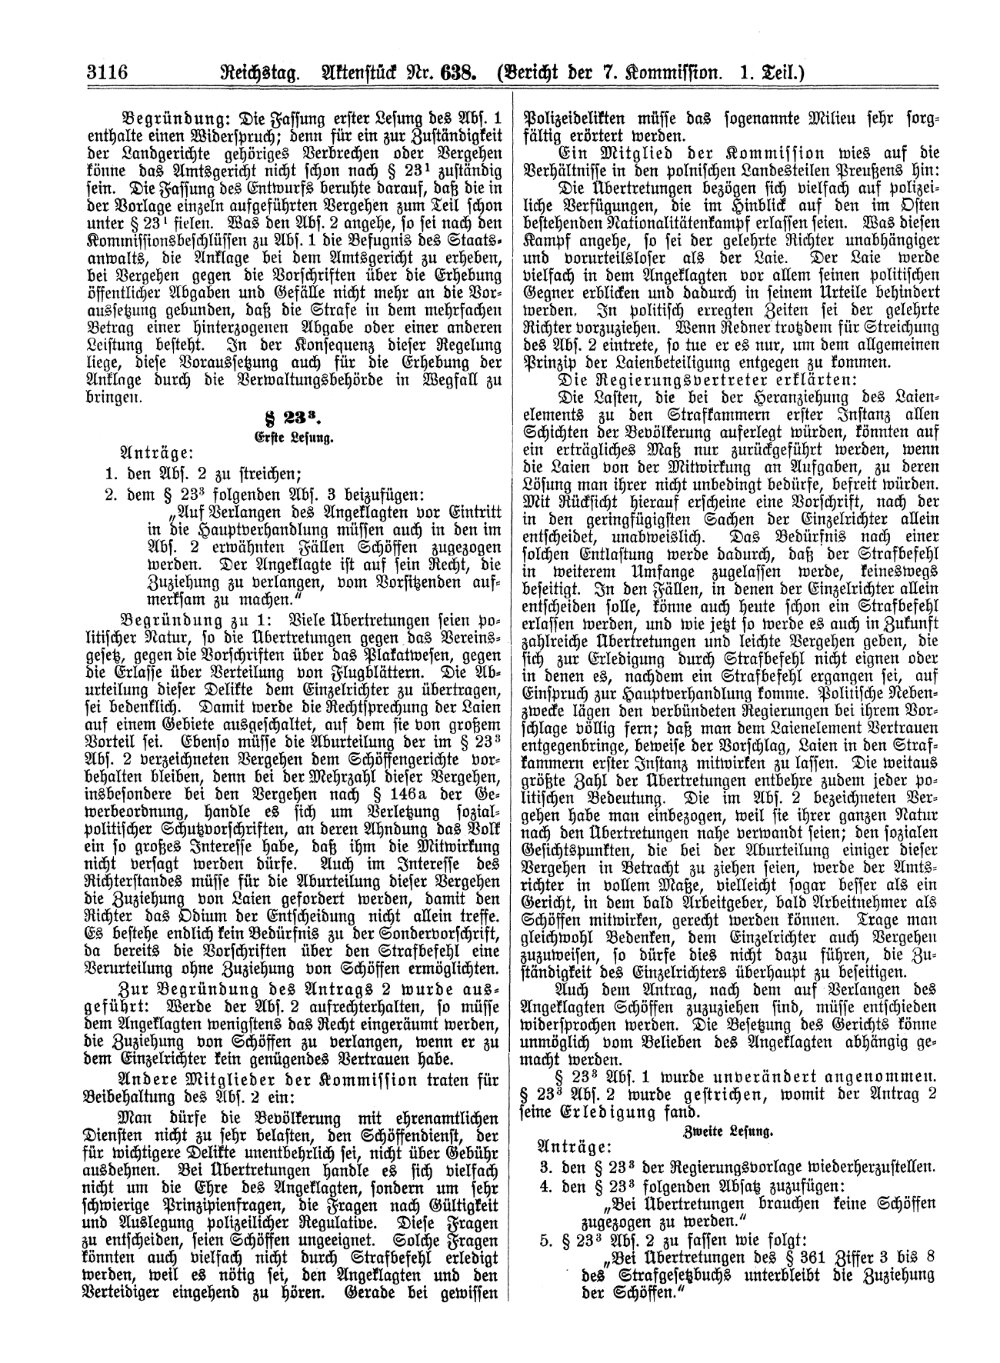 Scan of page 3116